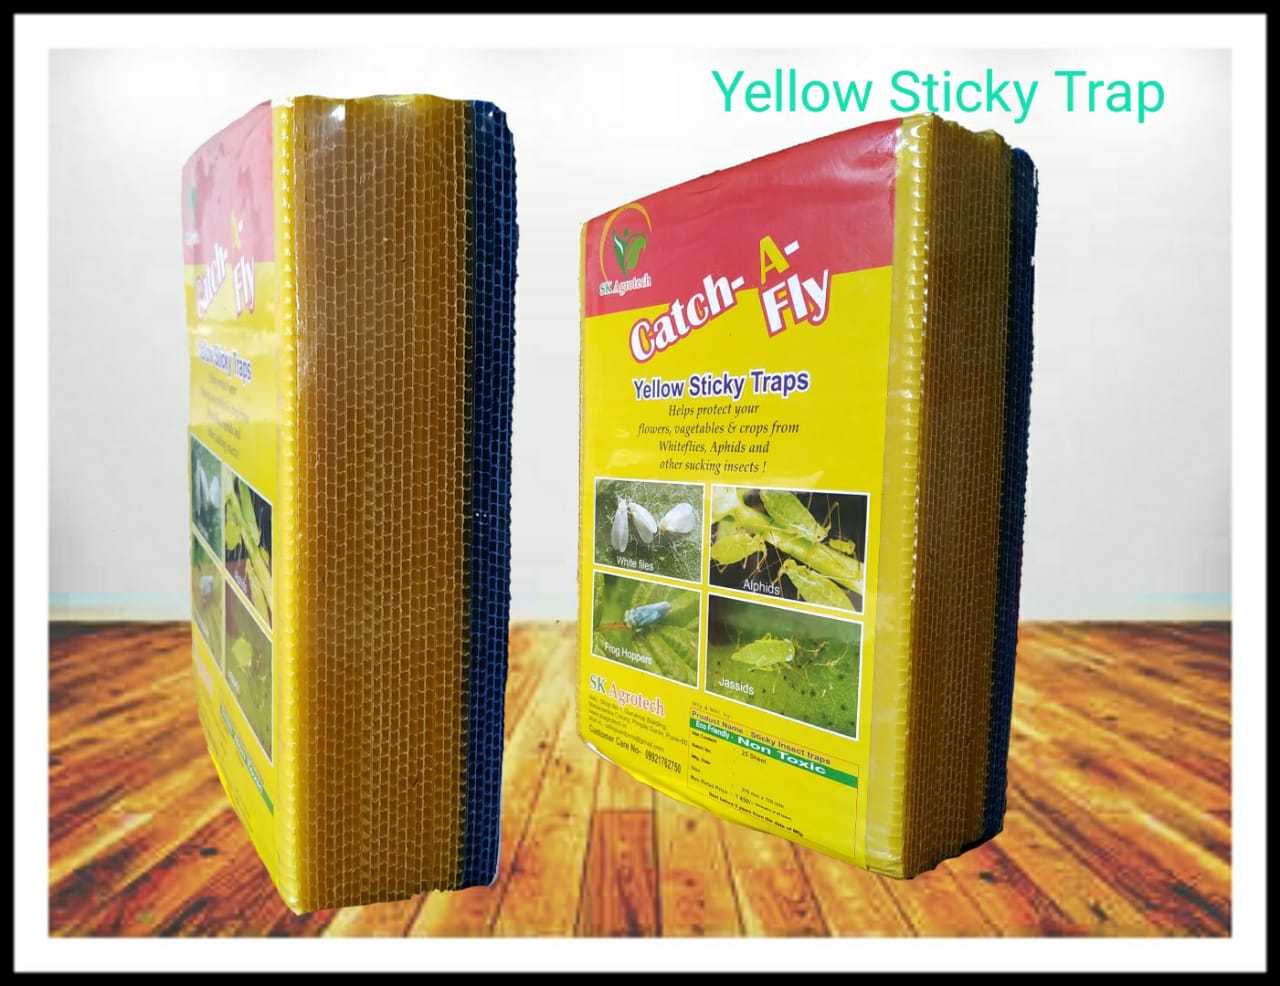   Yellow sticky insect pheromone trap Economical